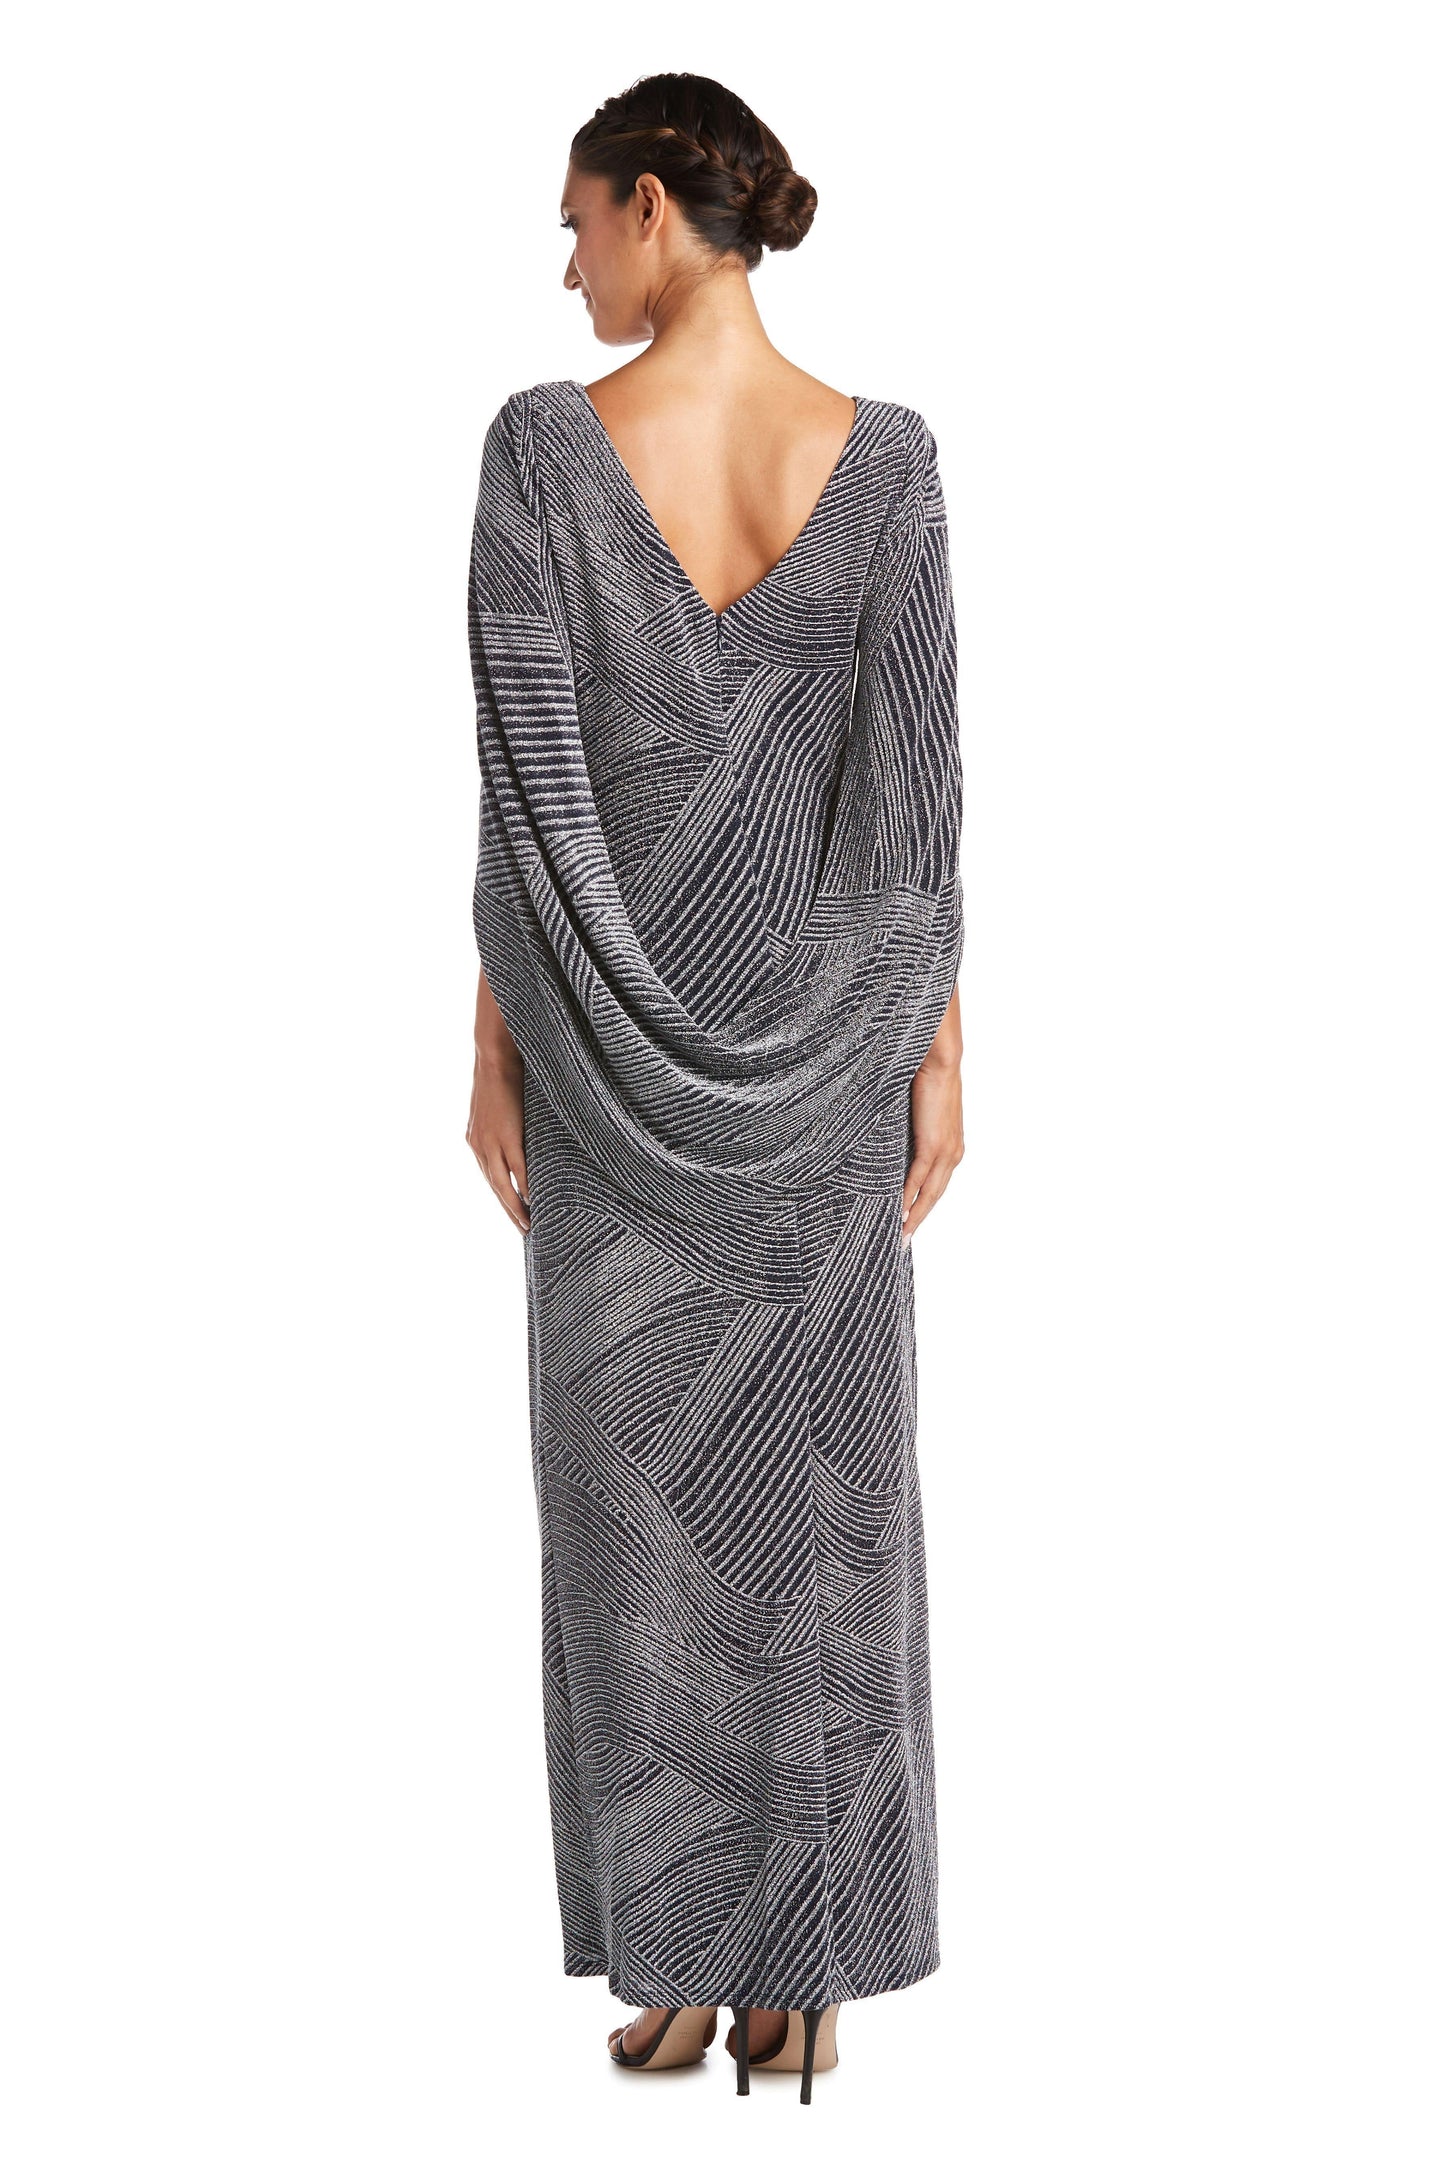 R&M Richards Long Formal Fitted Metallic Dress 5912 - The Dress Outlet